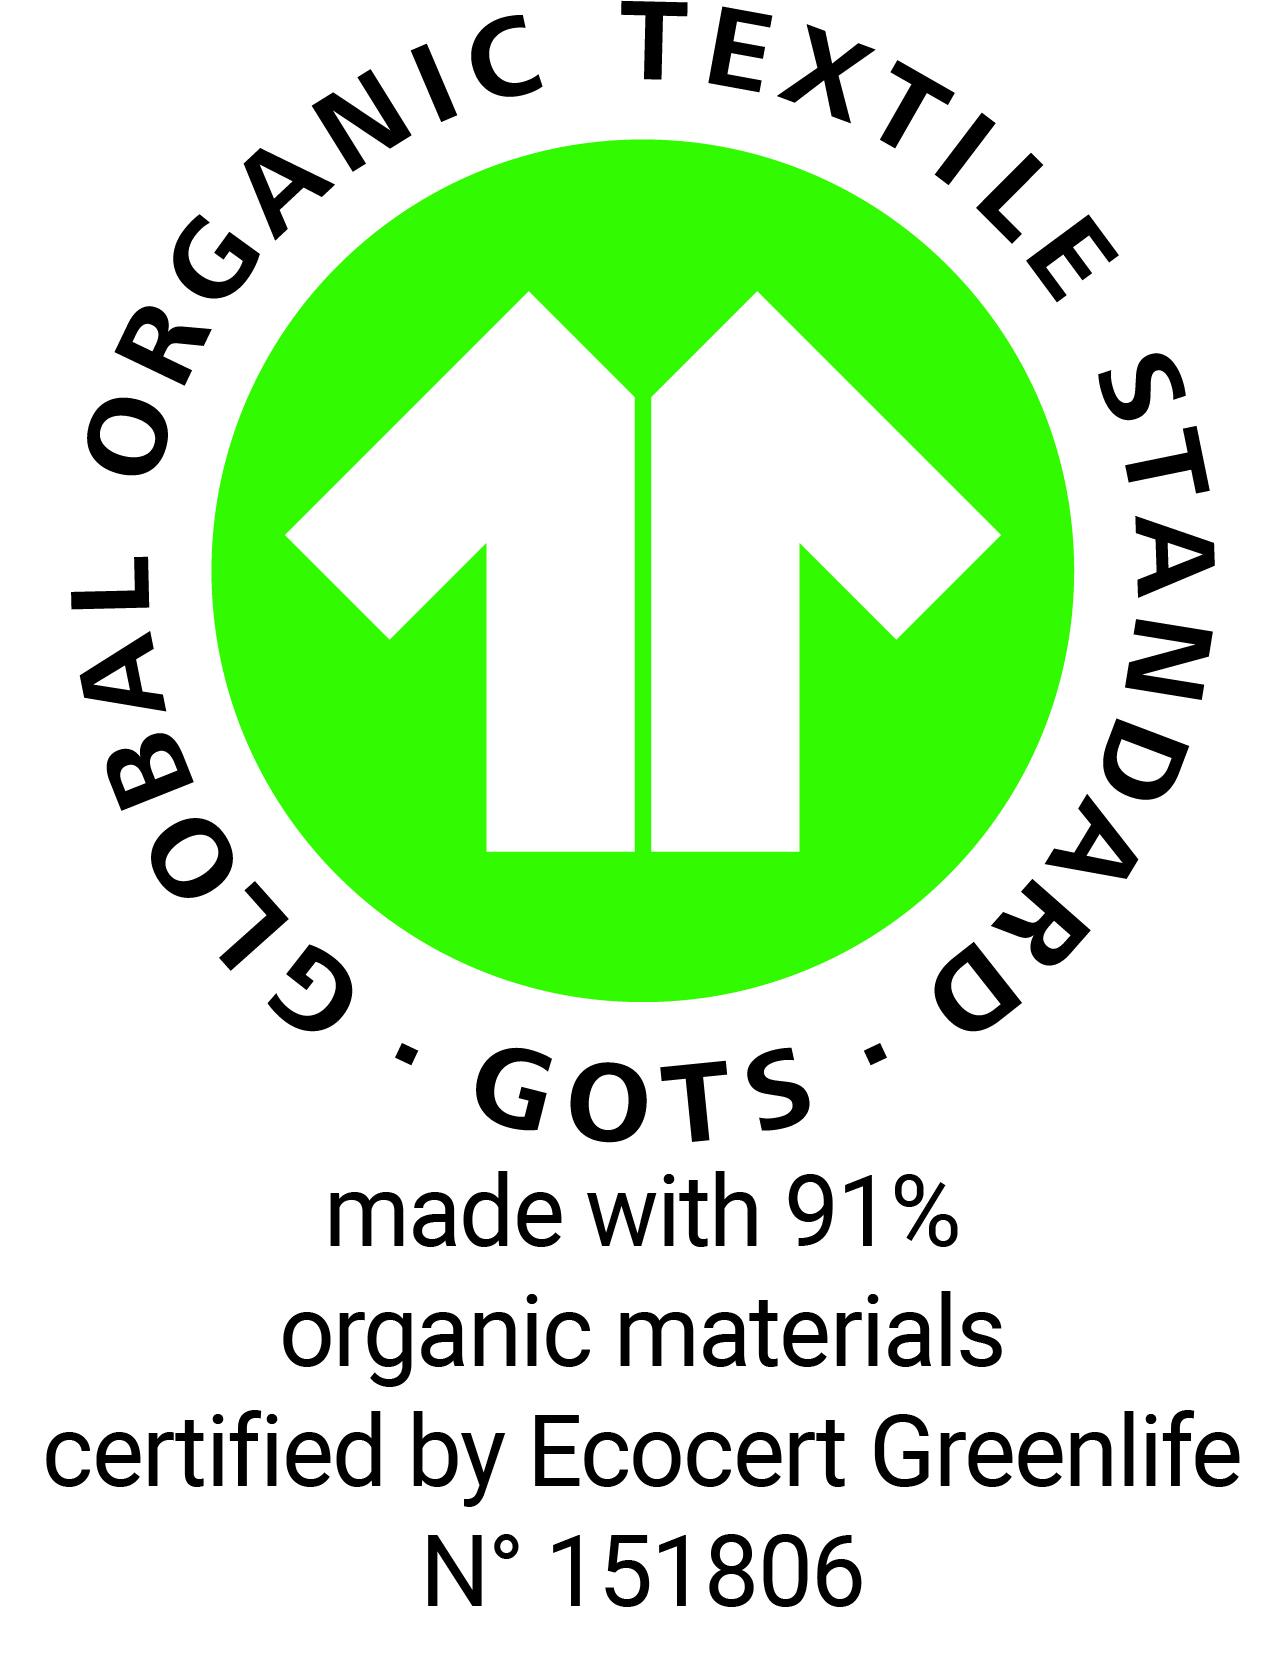 91% organic certified by Ecocert Greenlife N° 151806